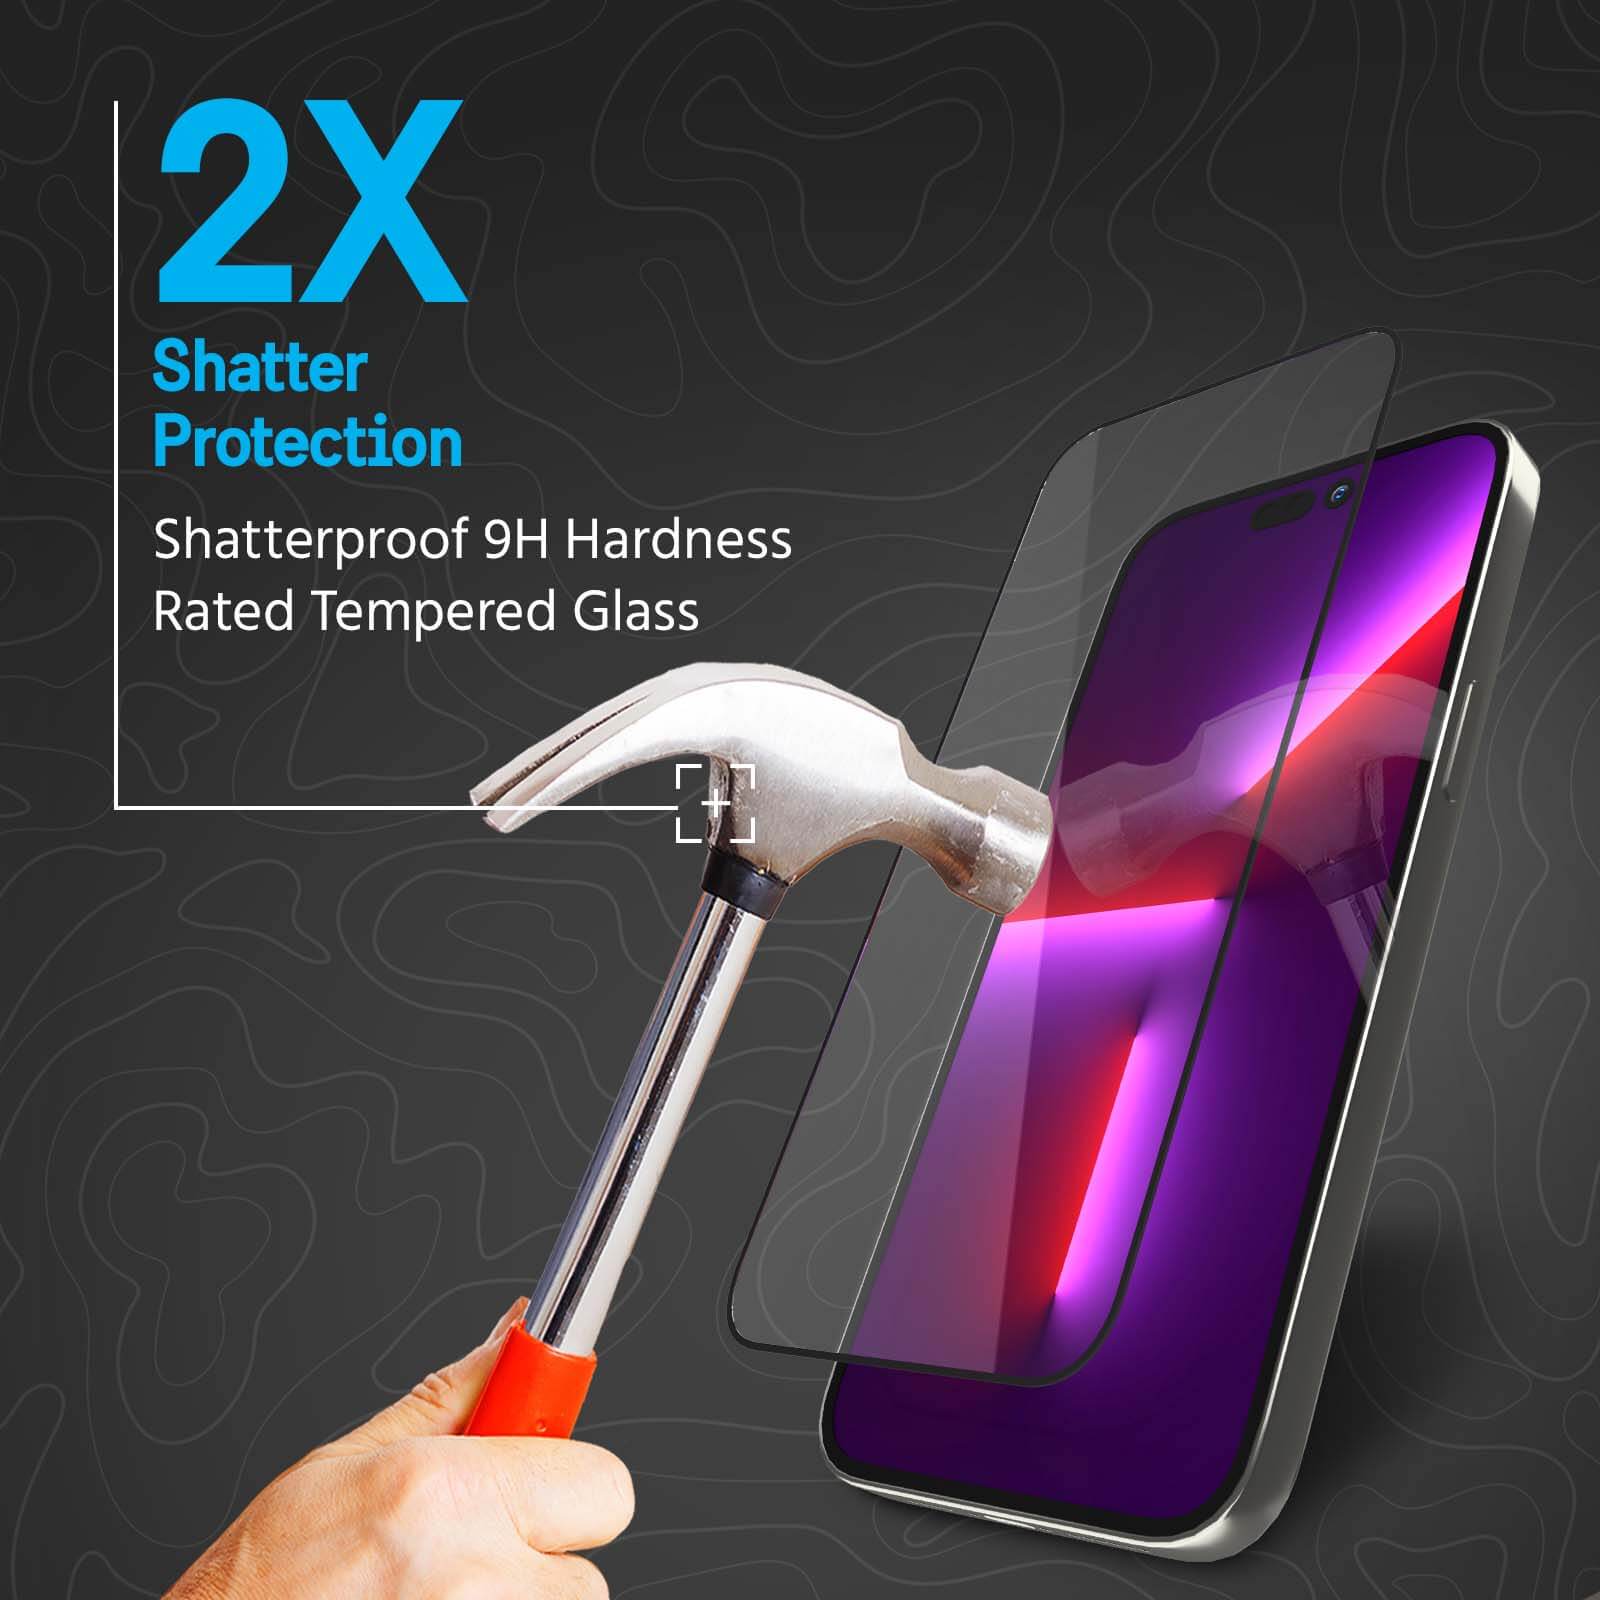 2x Shatter Protection. Shatterproof 9h hardness rated tempered glass. color::clear